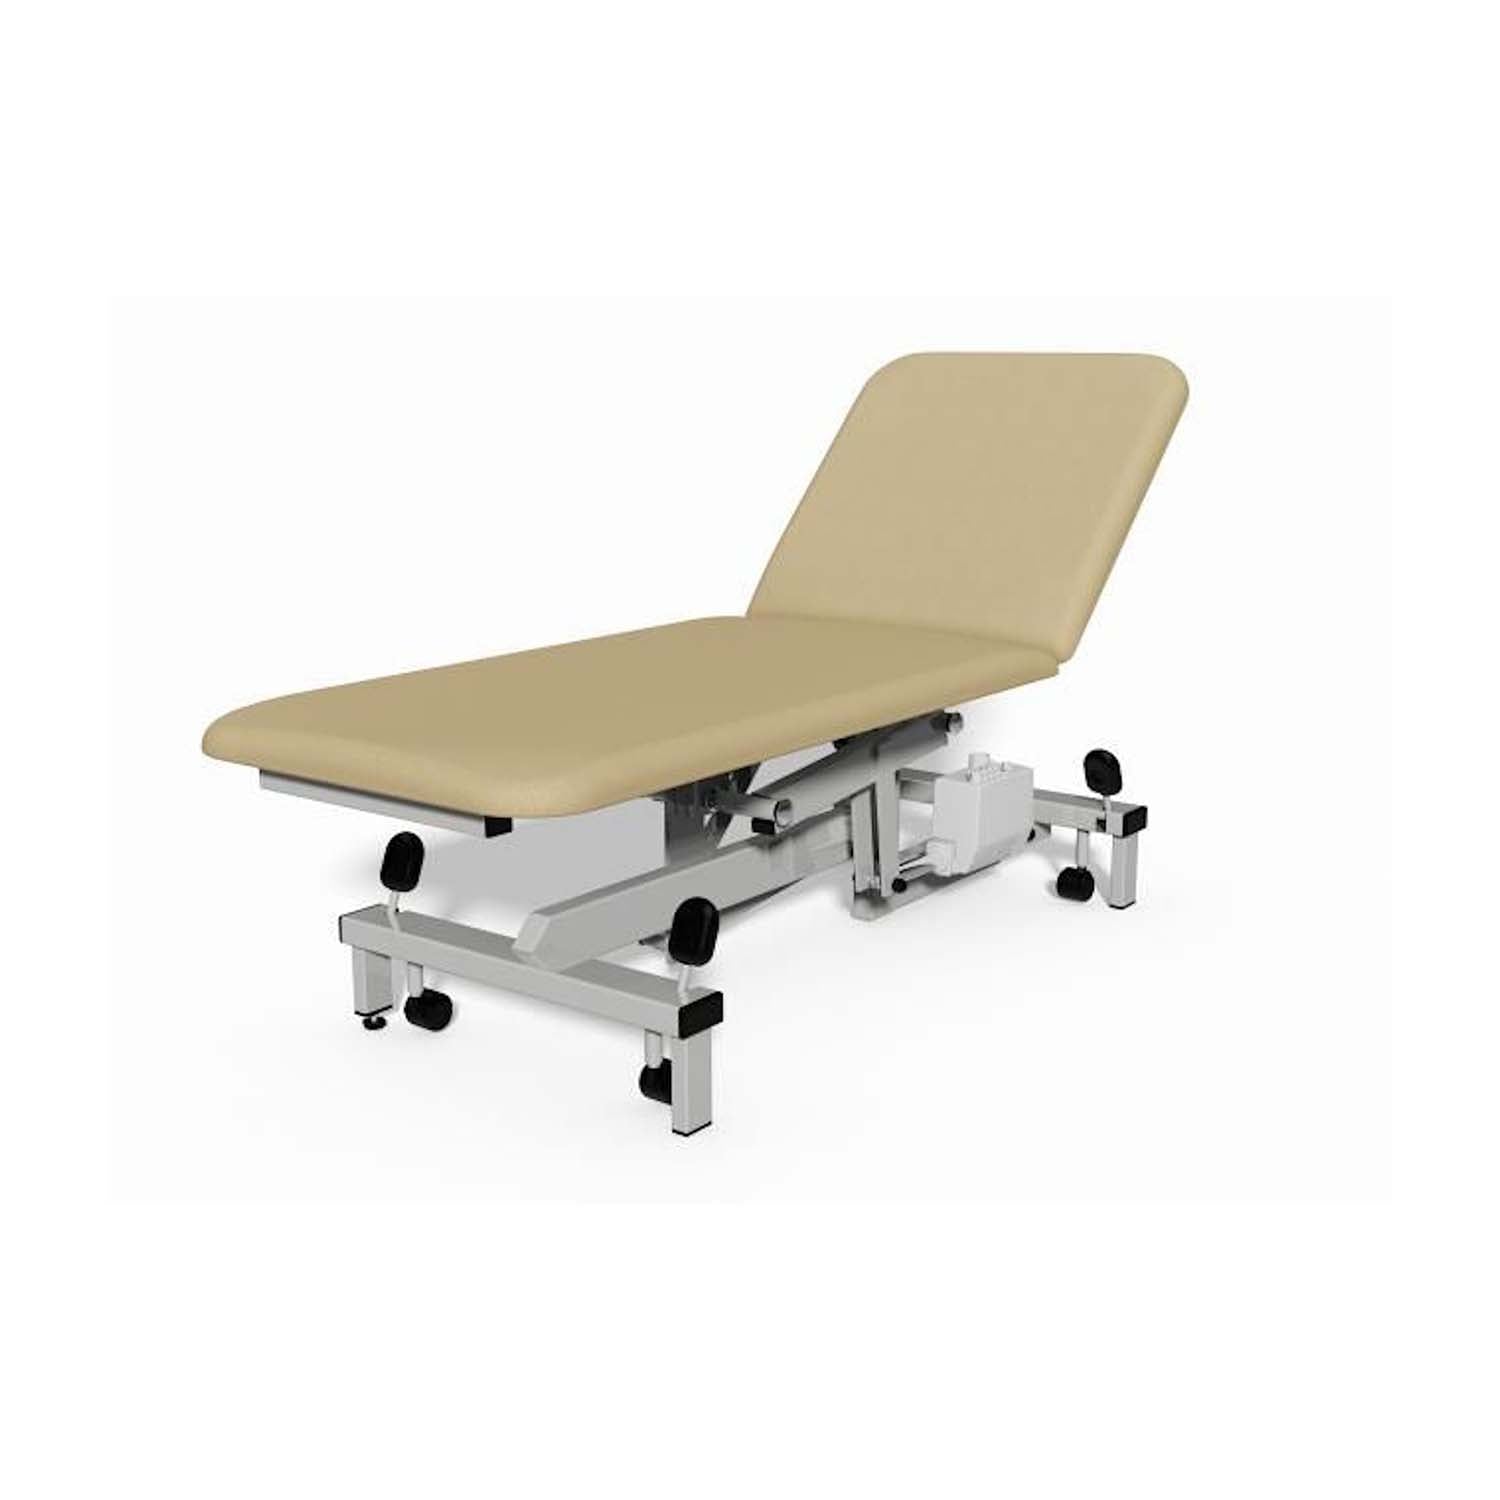 Plinth 2000 Model 502 Examination Couch | Electric | Almond